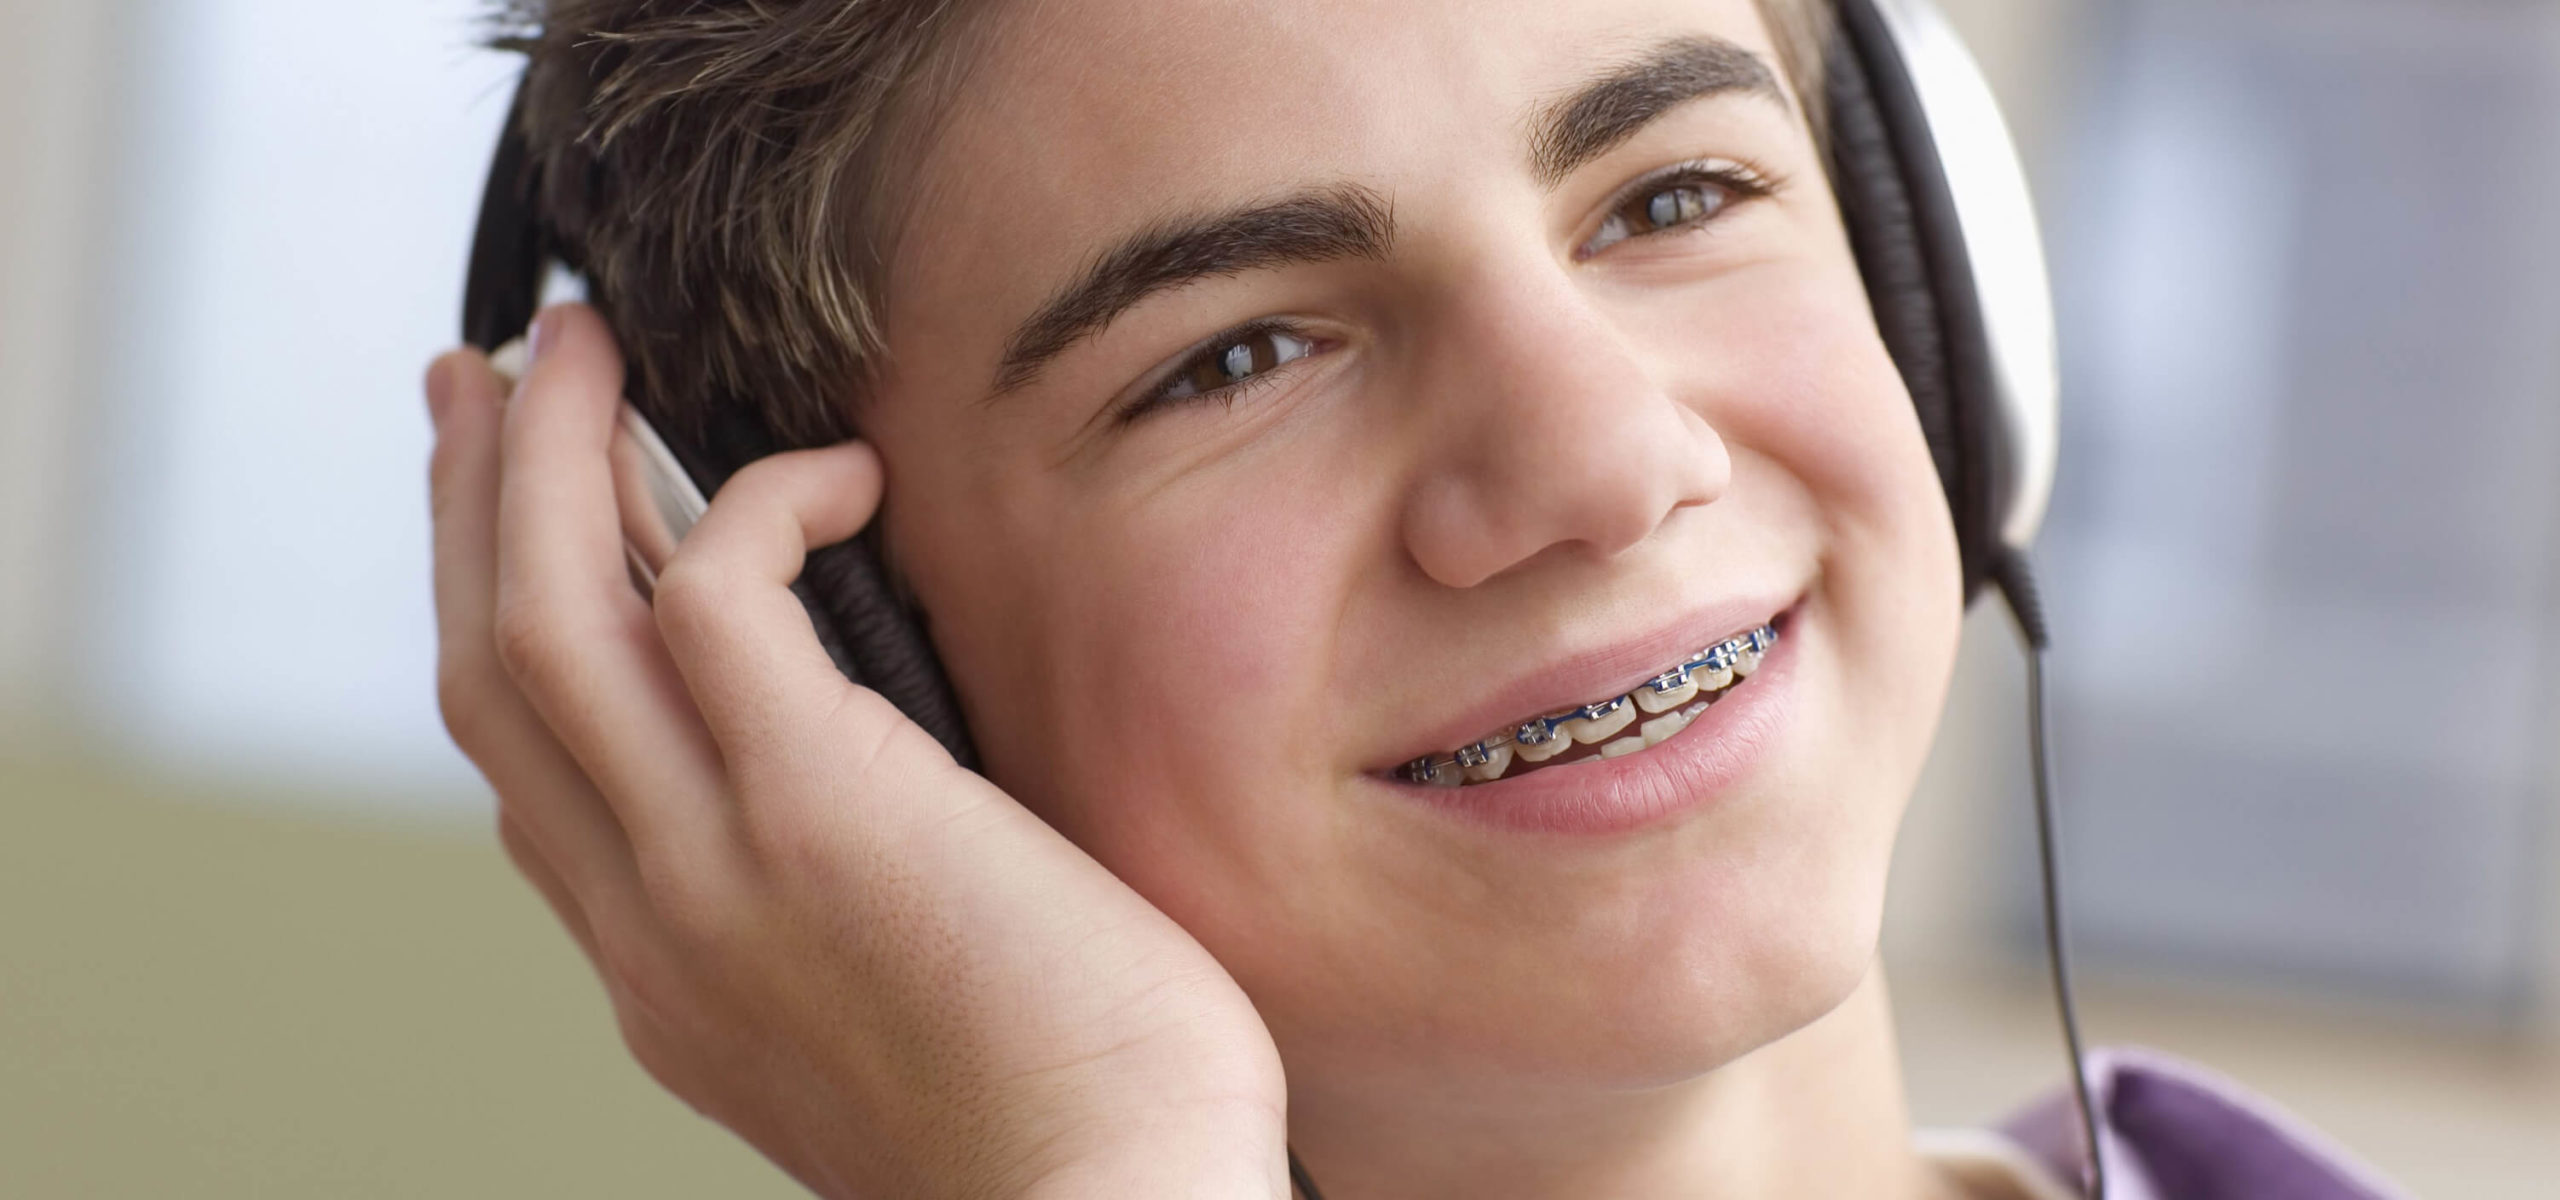 3 Tips To Prepare For Your First Week With Braces